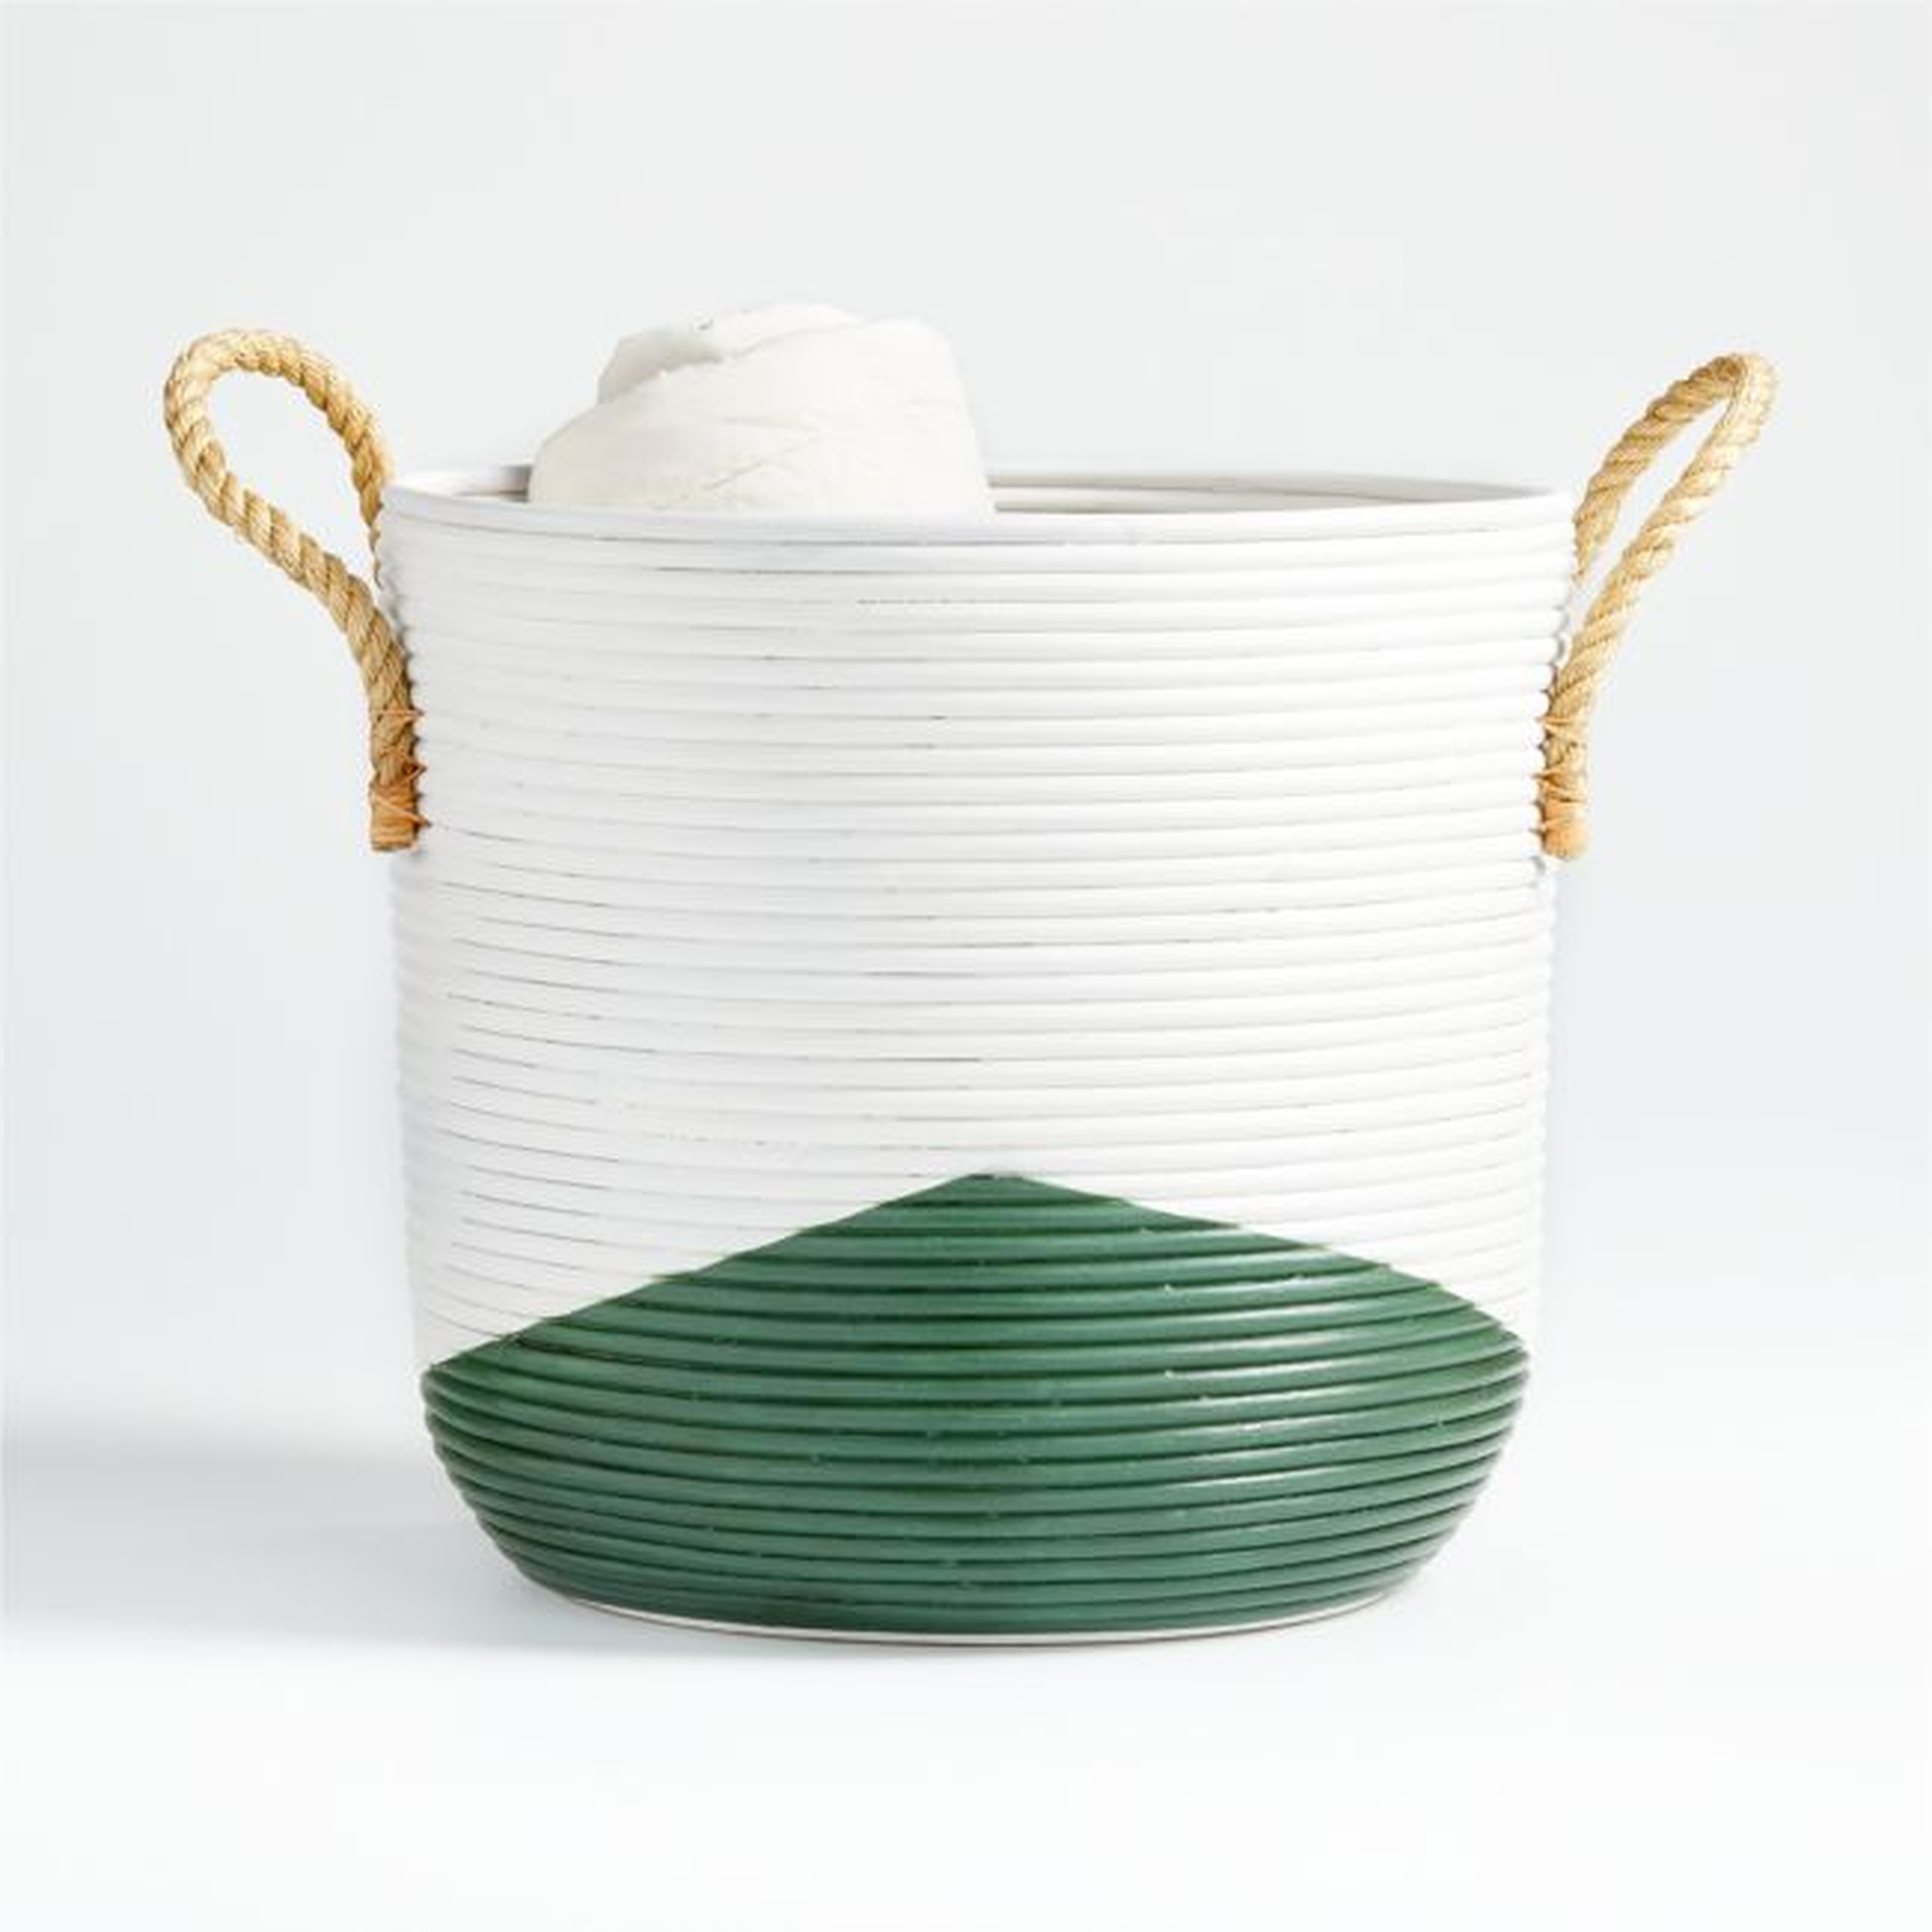 Green and White Coiled Rattan Basket - Crate and Barrel